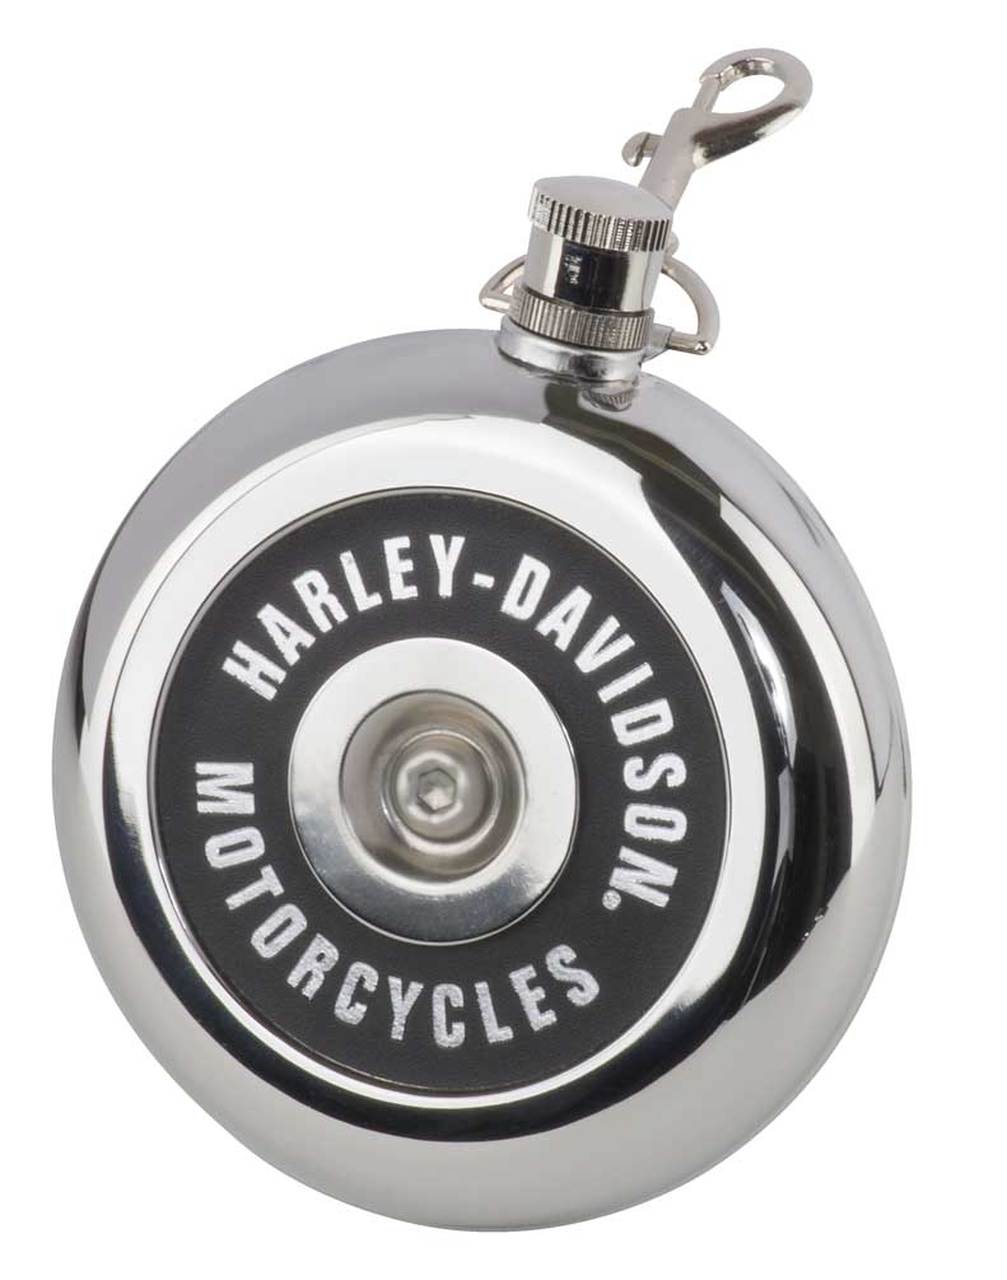 Harley-Davidson® Air Cleaner Style Round Flask, 8 oz. – Silver Stainless Steel